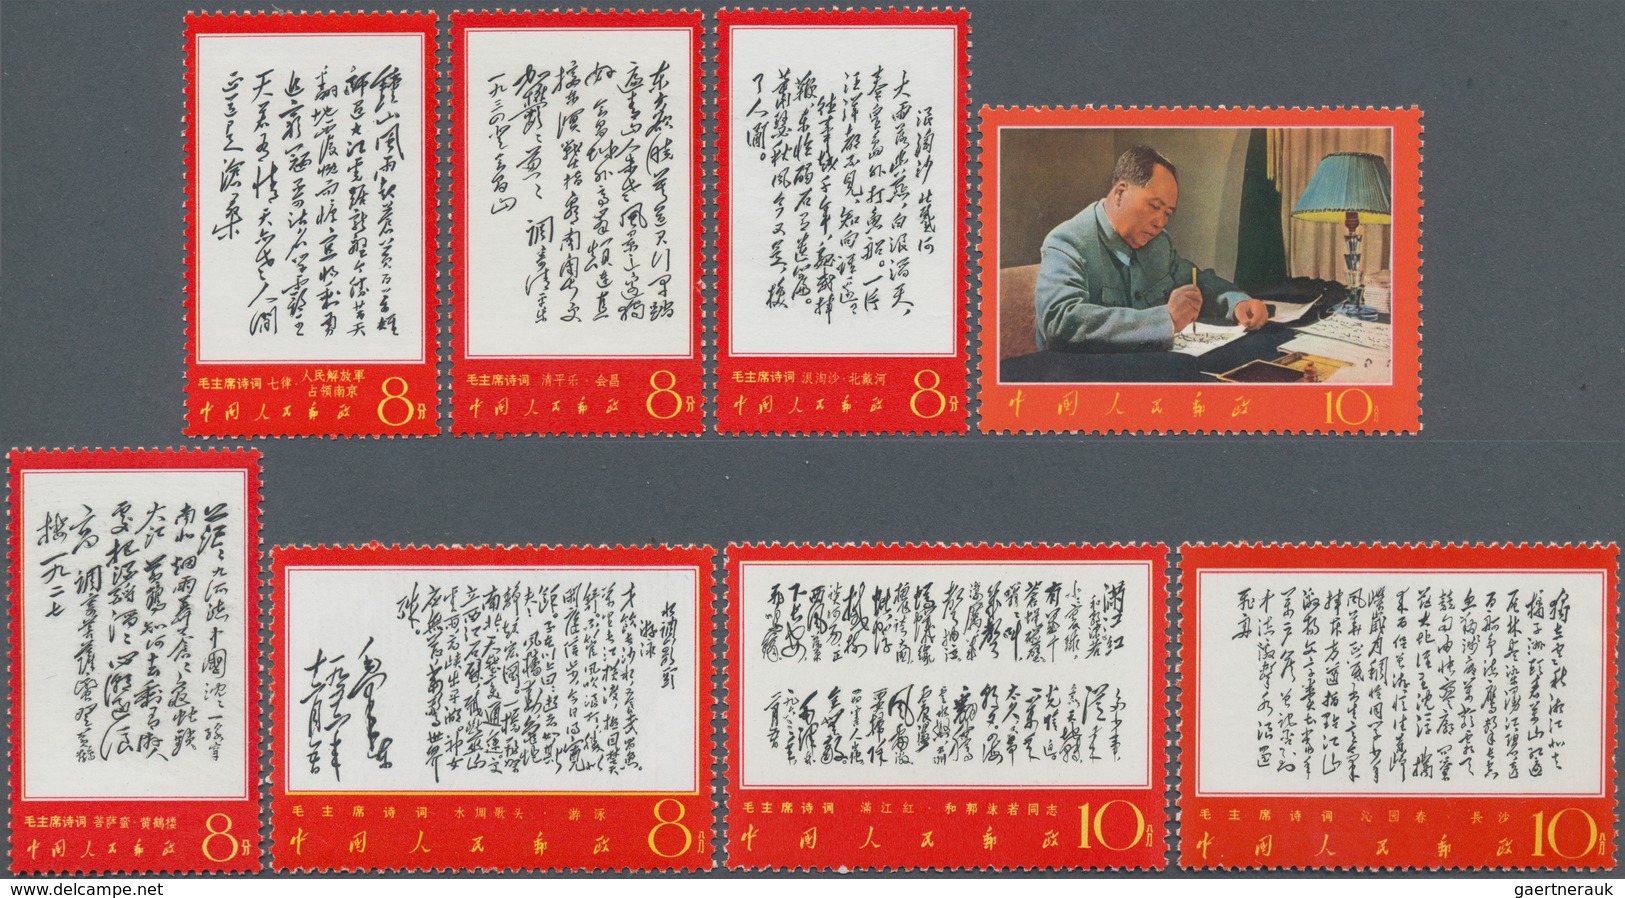 China - Volksrepublik: 1967/1968, Mao's Poems (W7) MNH. Michel Cat.value 6.000,- €. - Lettres & Documents